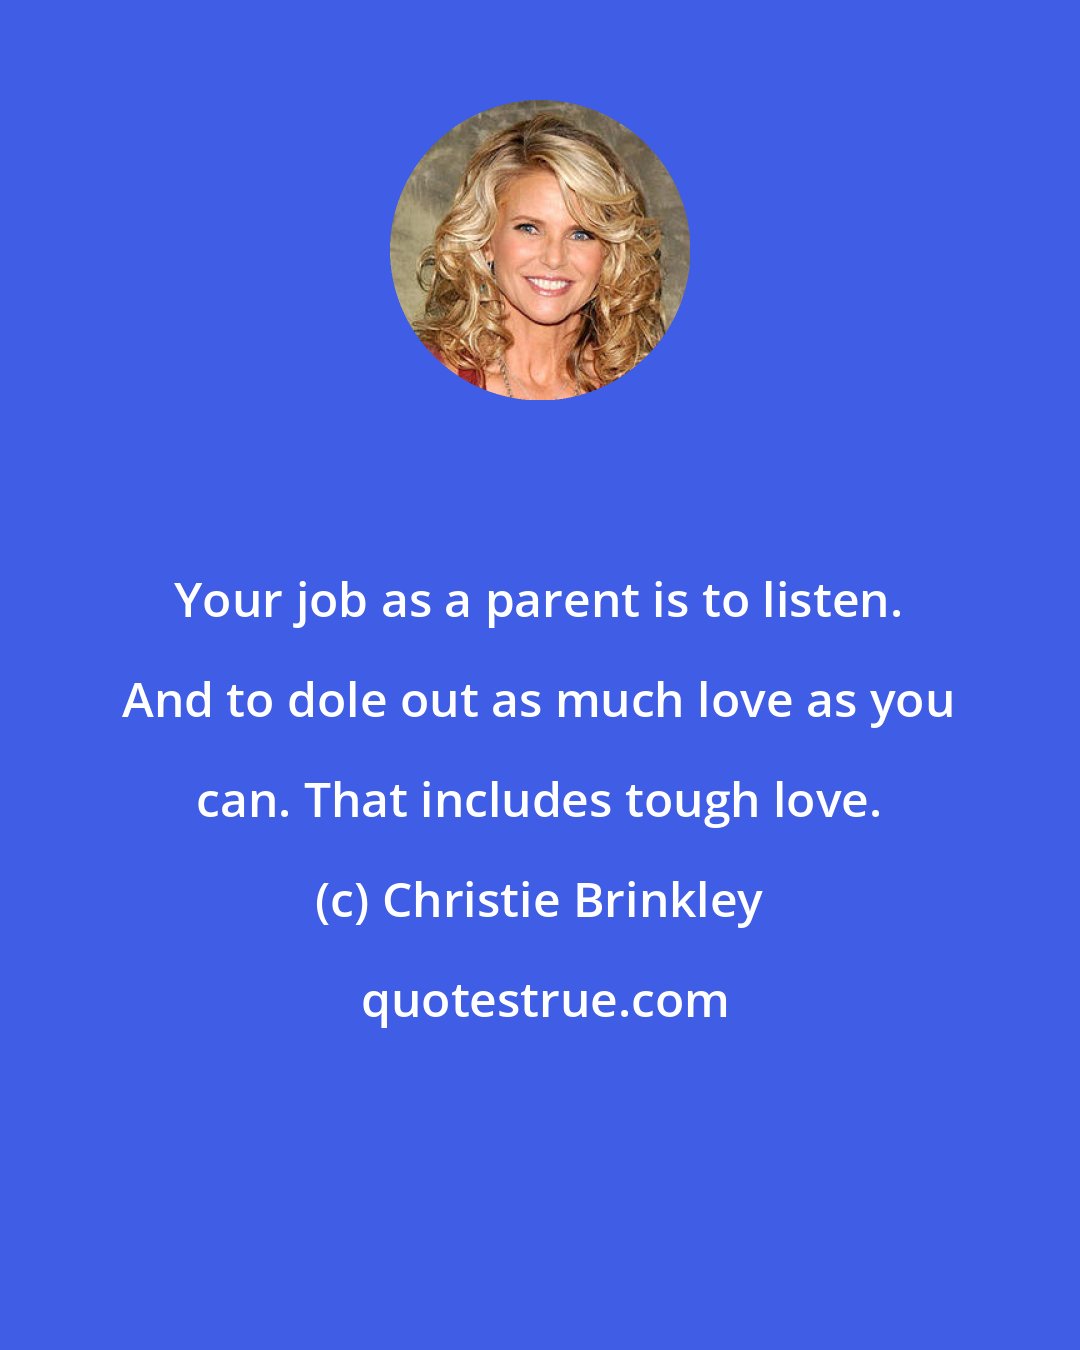 Christie Brinkley: Your job as a parent is to listen. And to dole out as much love as you can. That includes tough love.